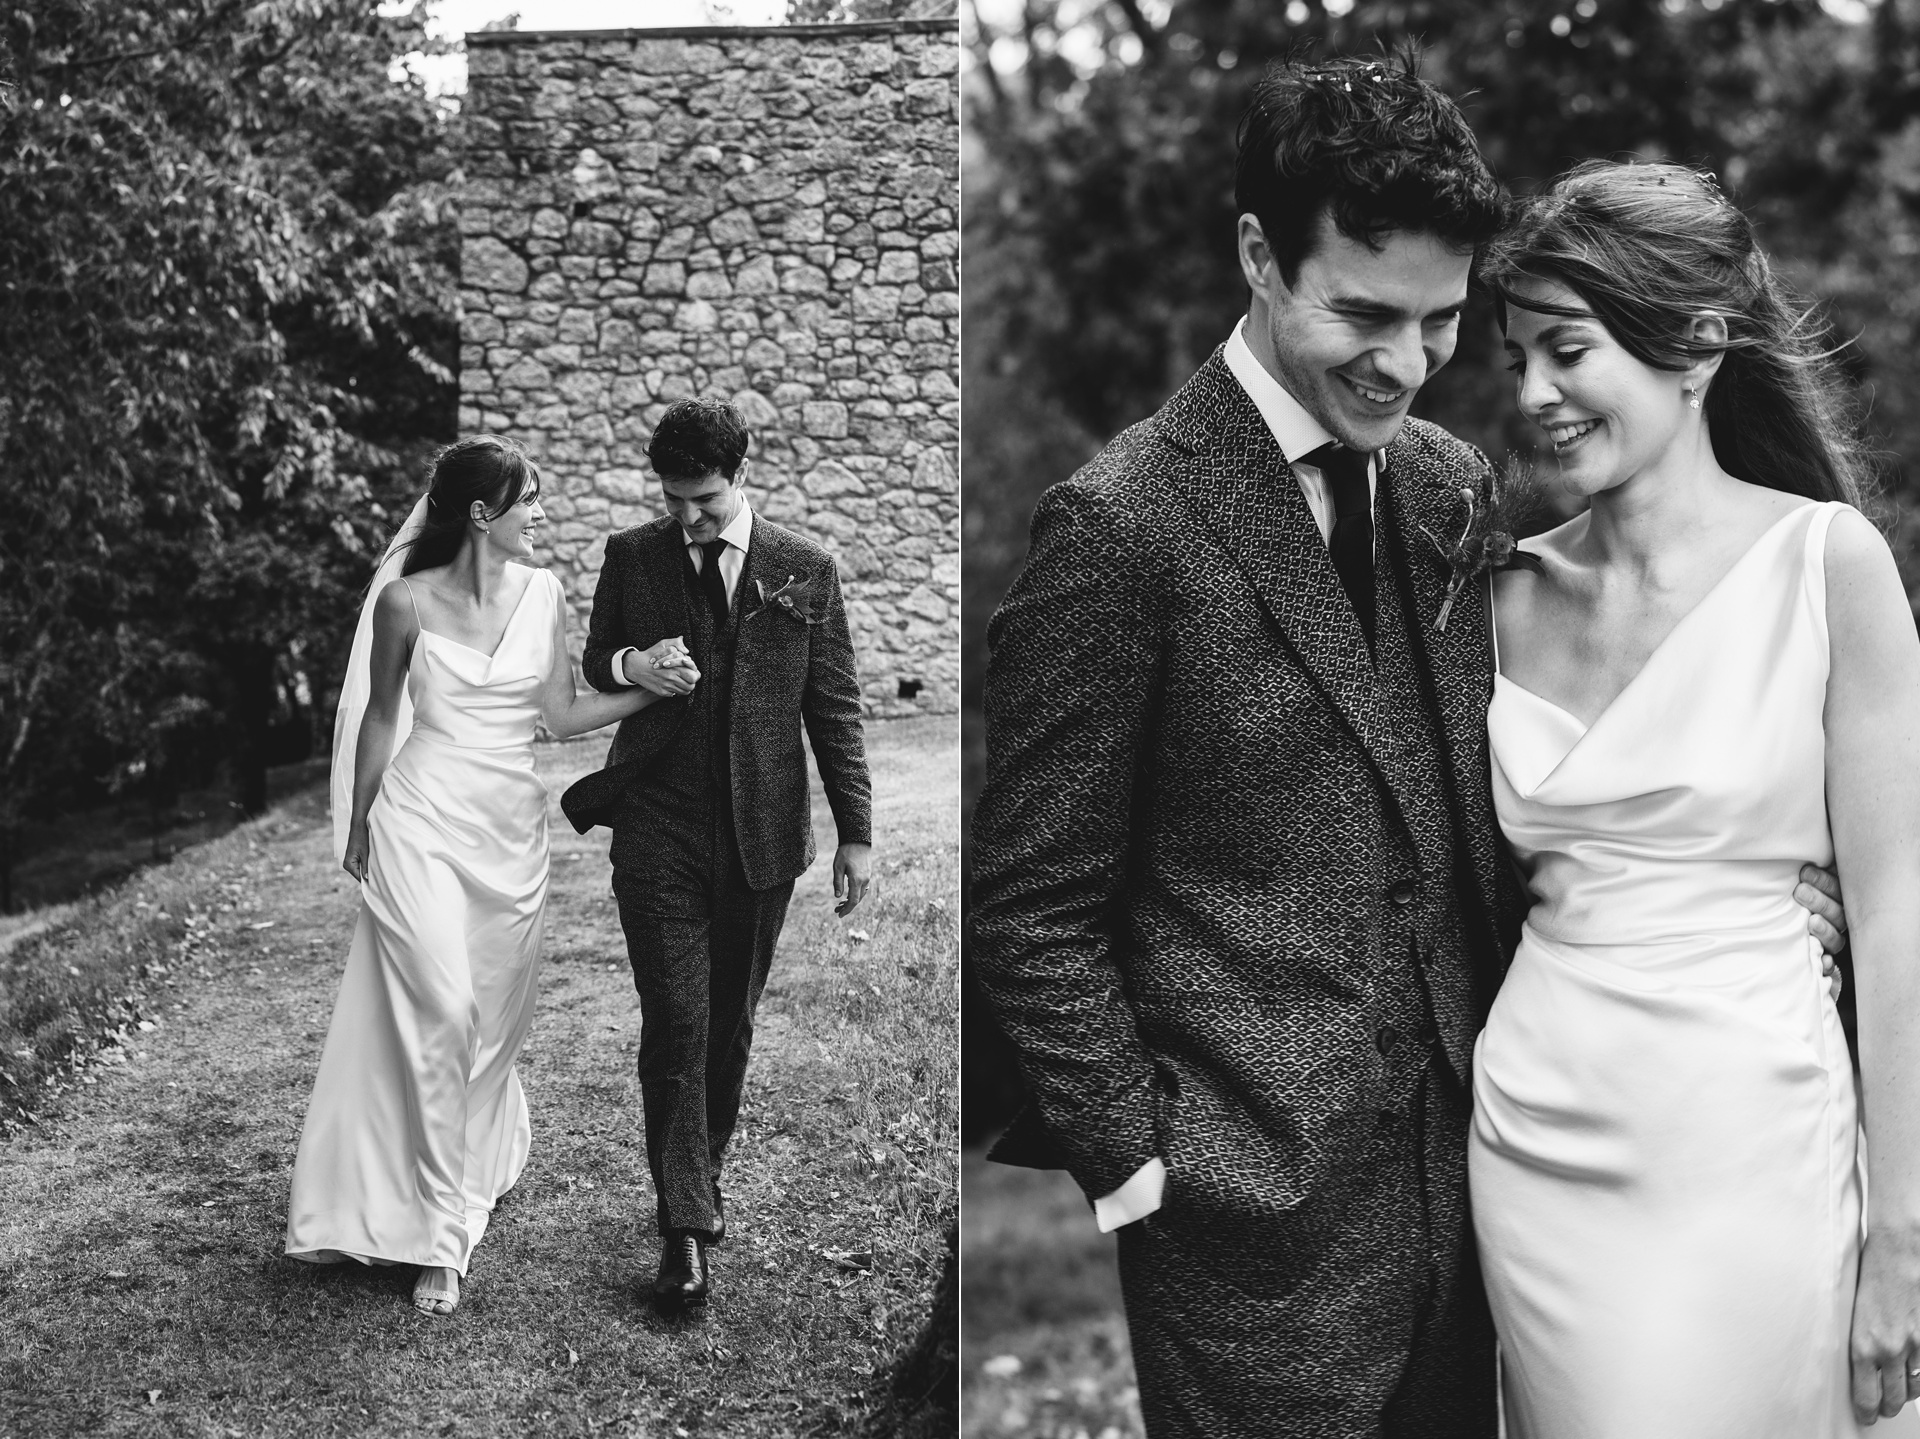 A bride in Vivienne Westwood and groom in a bespoke Casely Hayford suit walking hand in hand and smiling